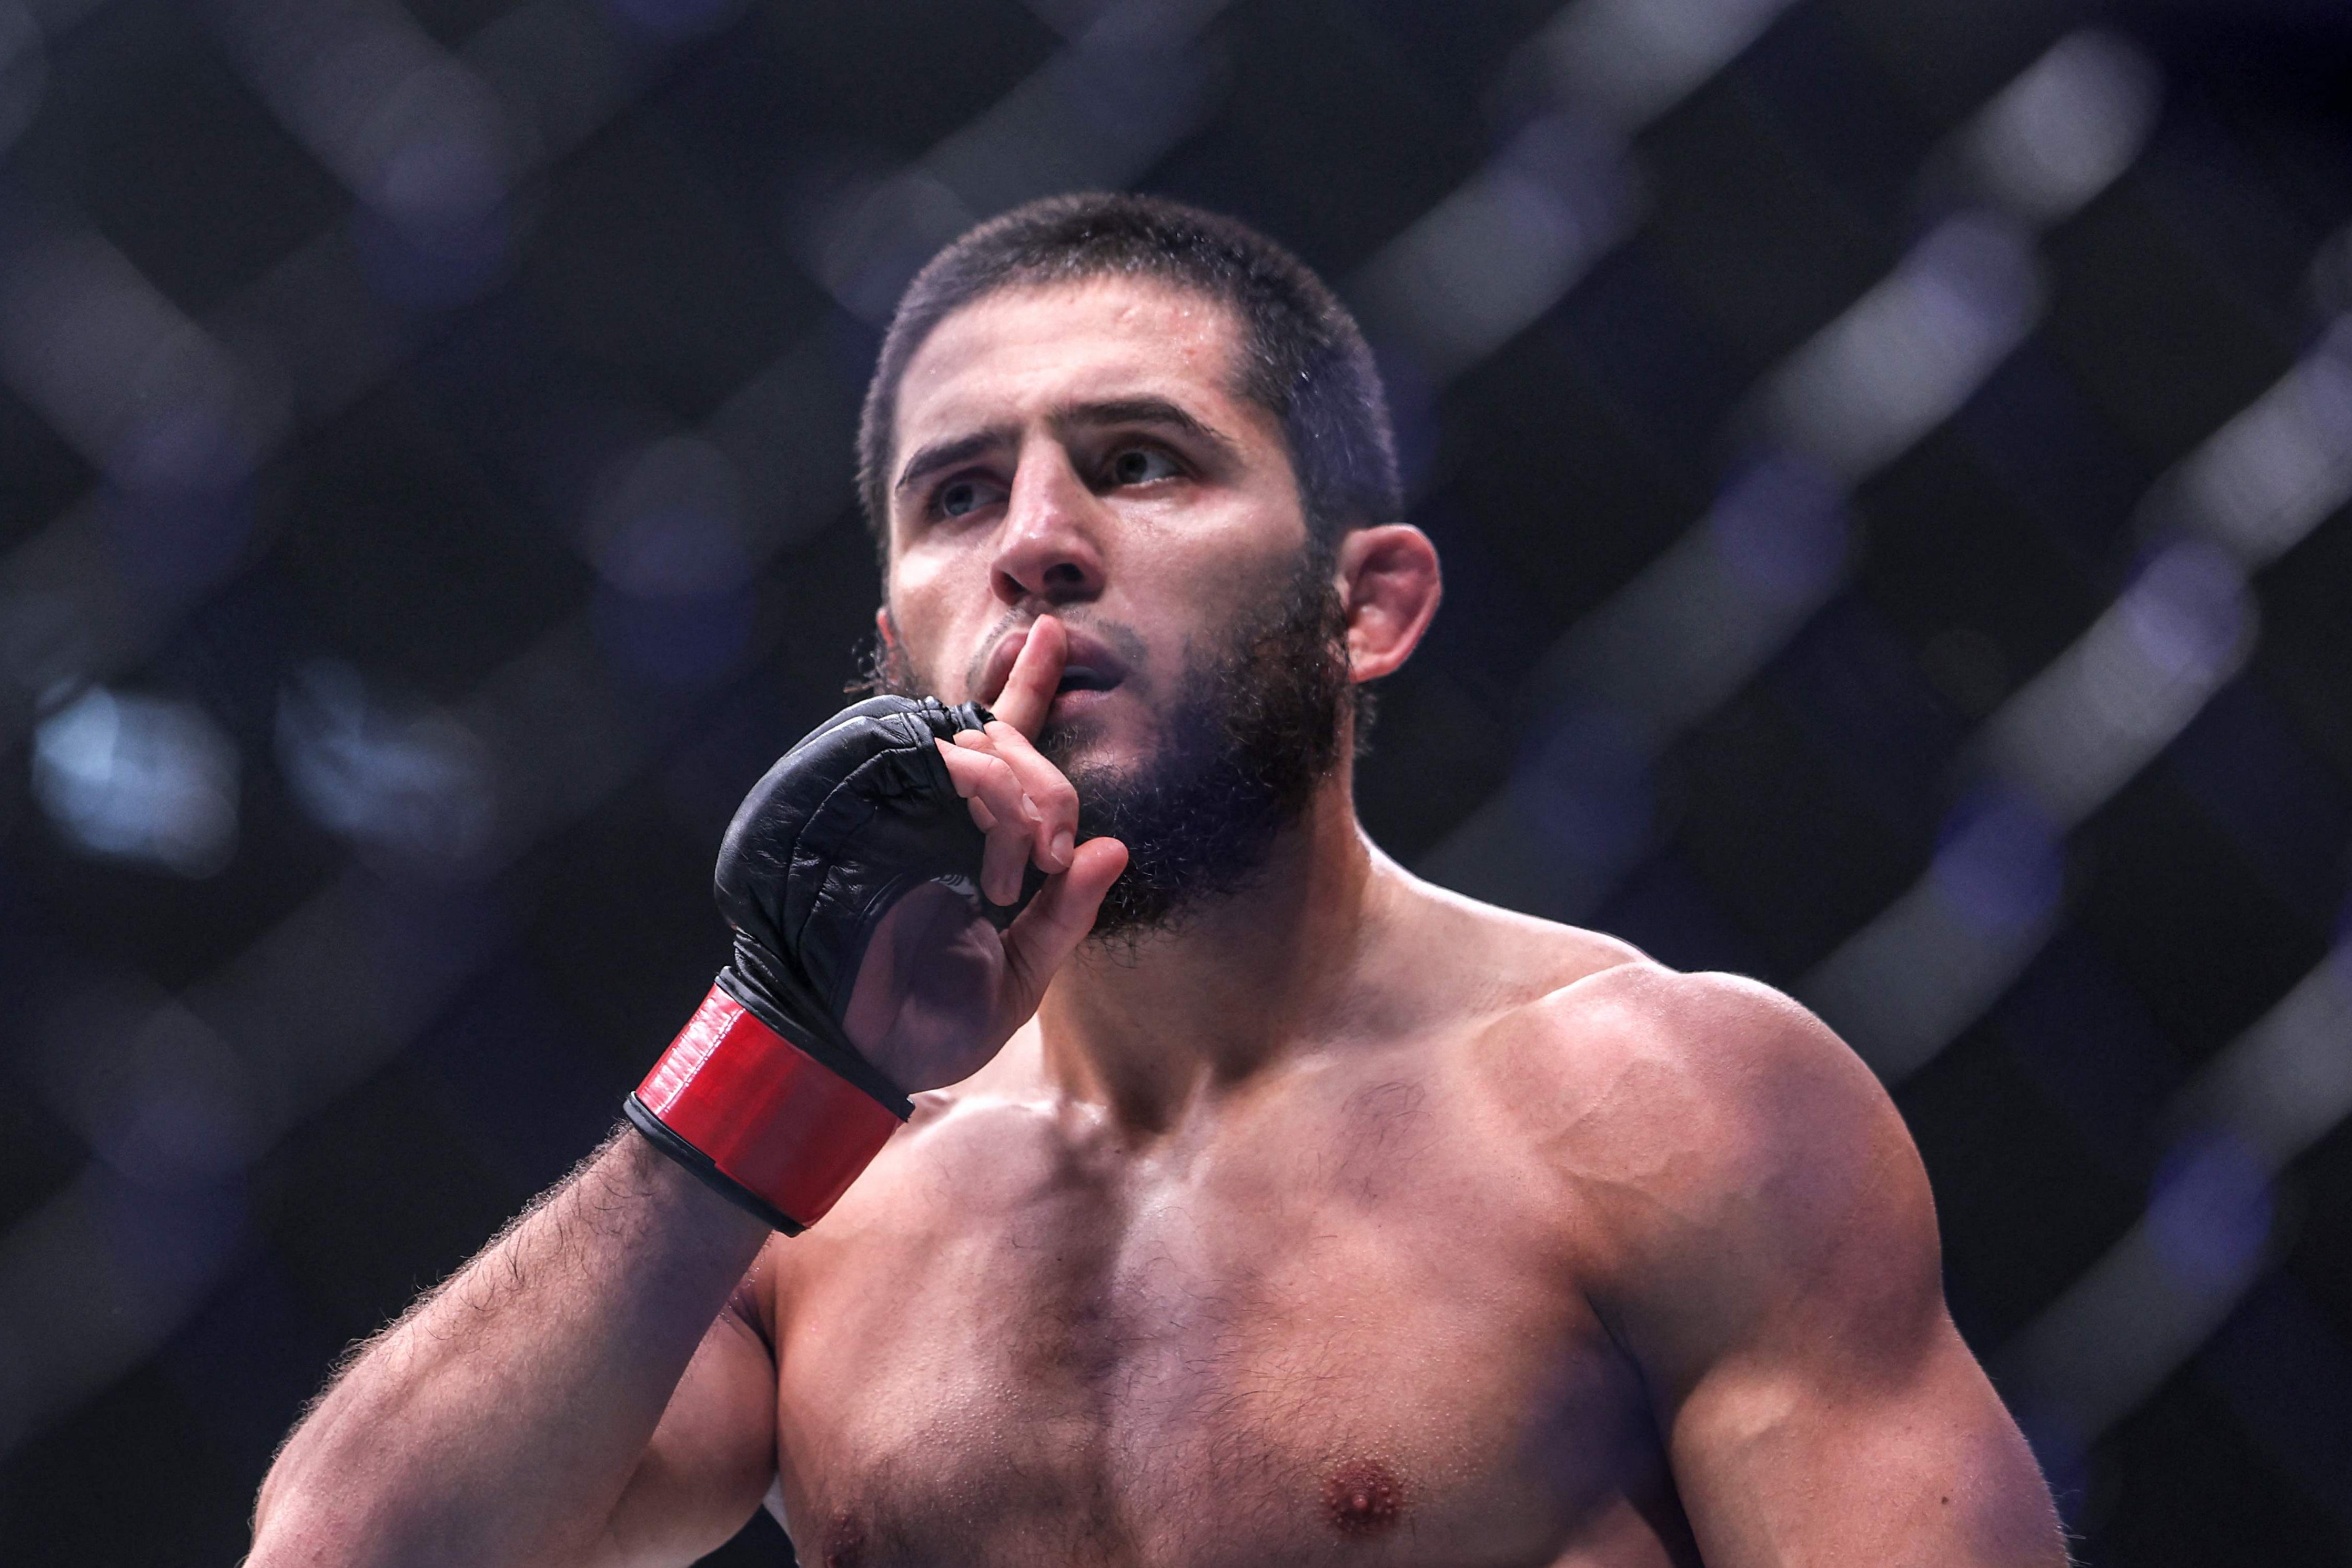 Islam Makhachev silenced the doubters with his knockout of Alexander Volkanovski